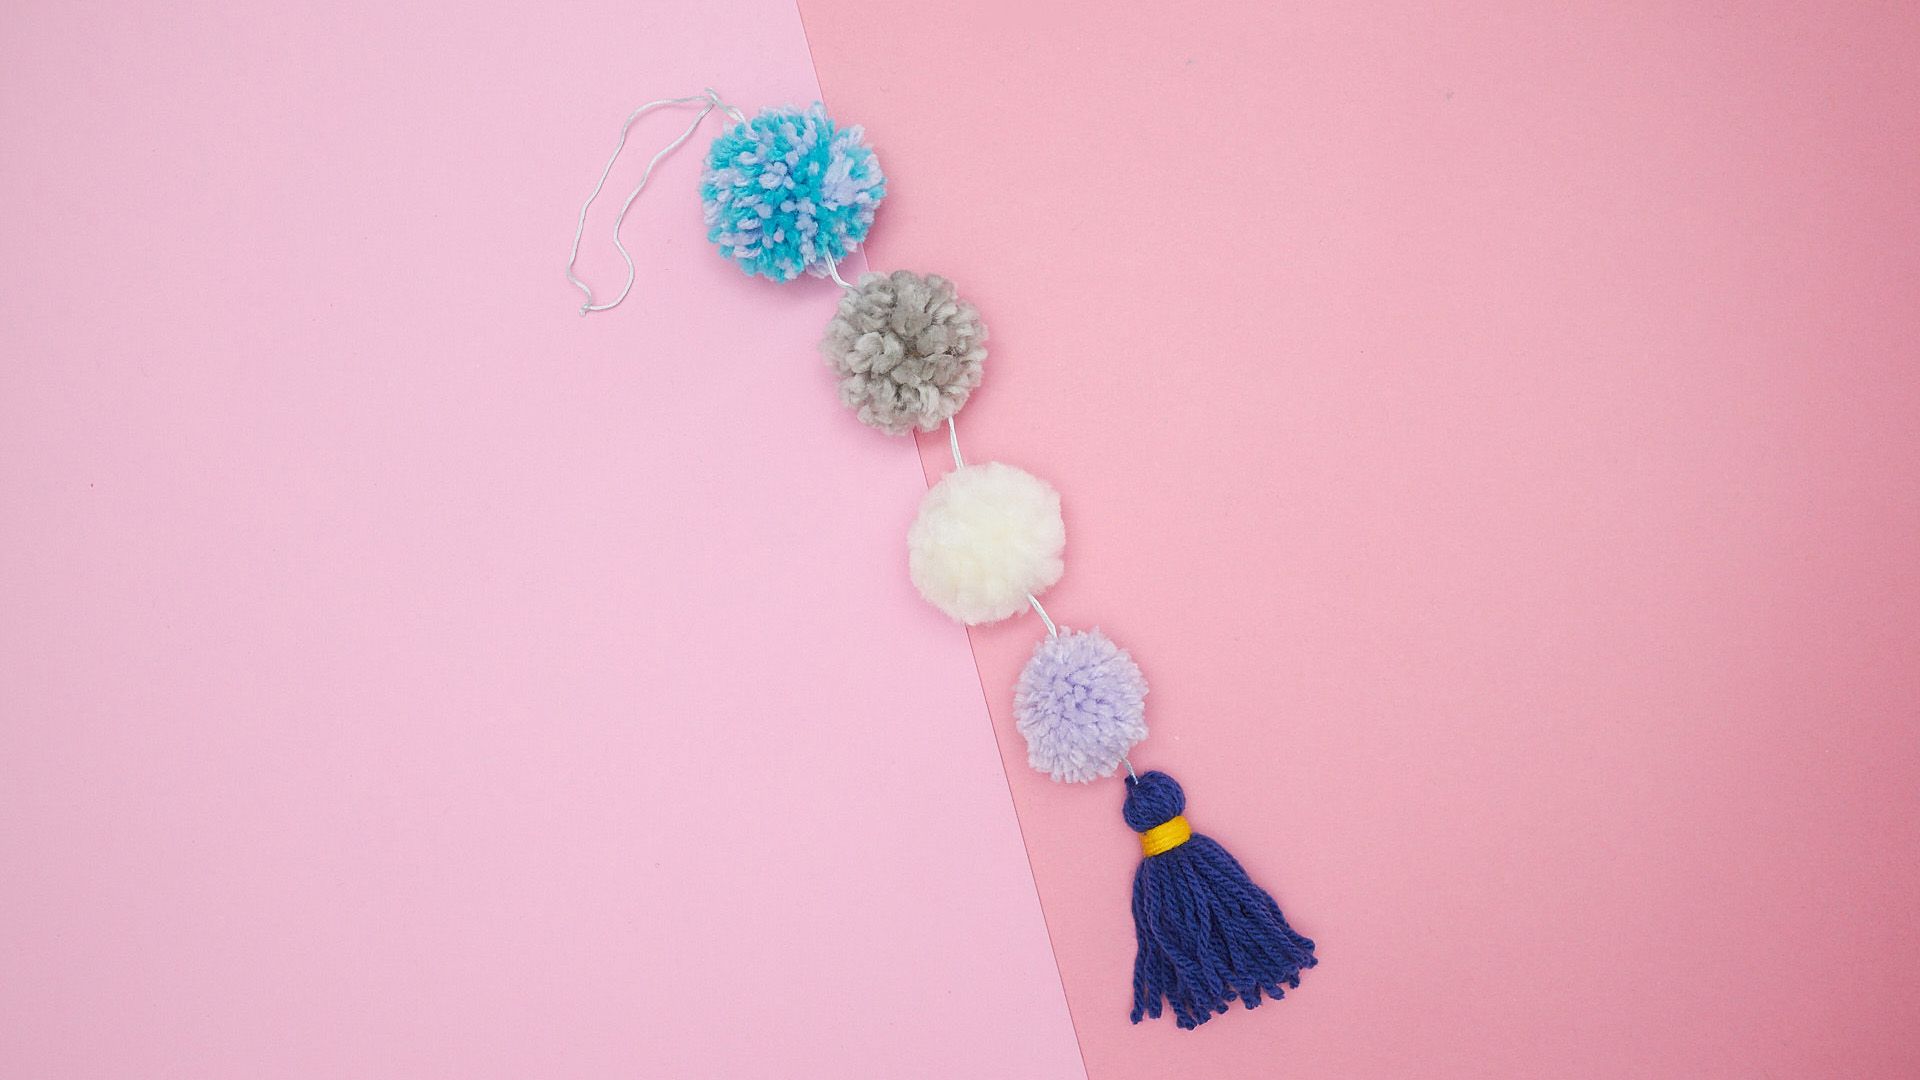 5 Minute Craft: Make Your Own Fluffy Pom Poms